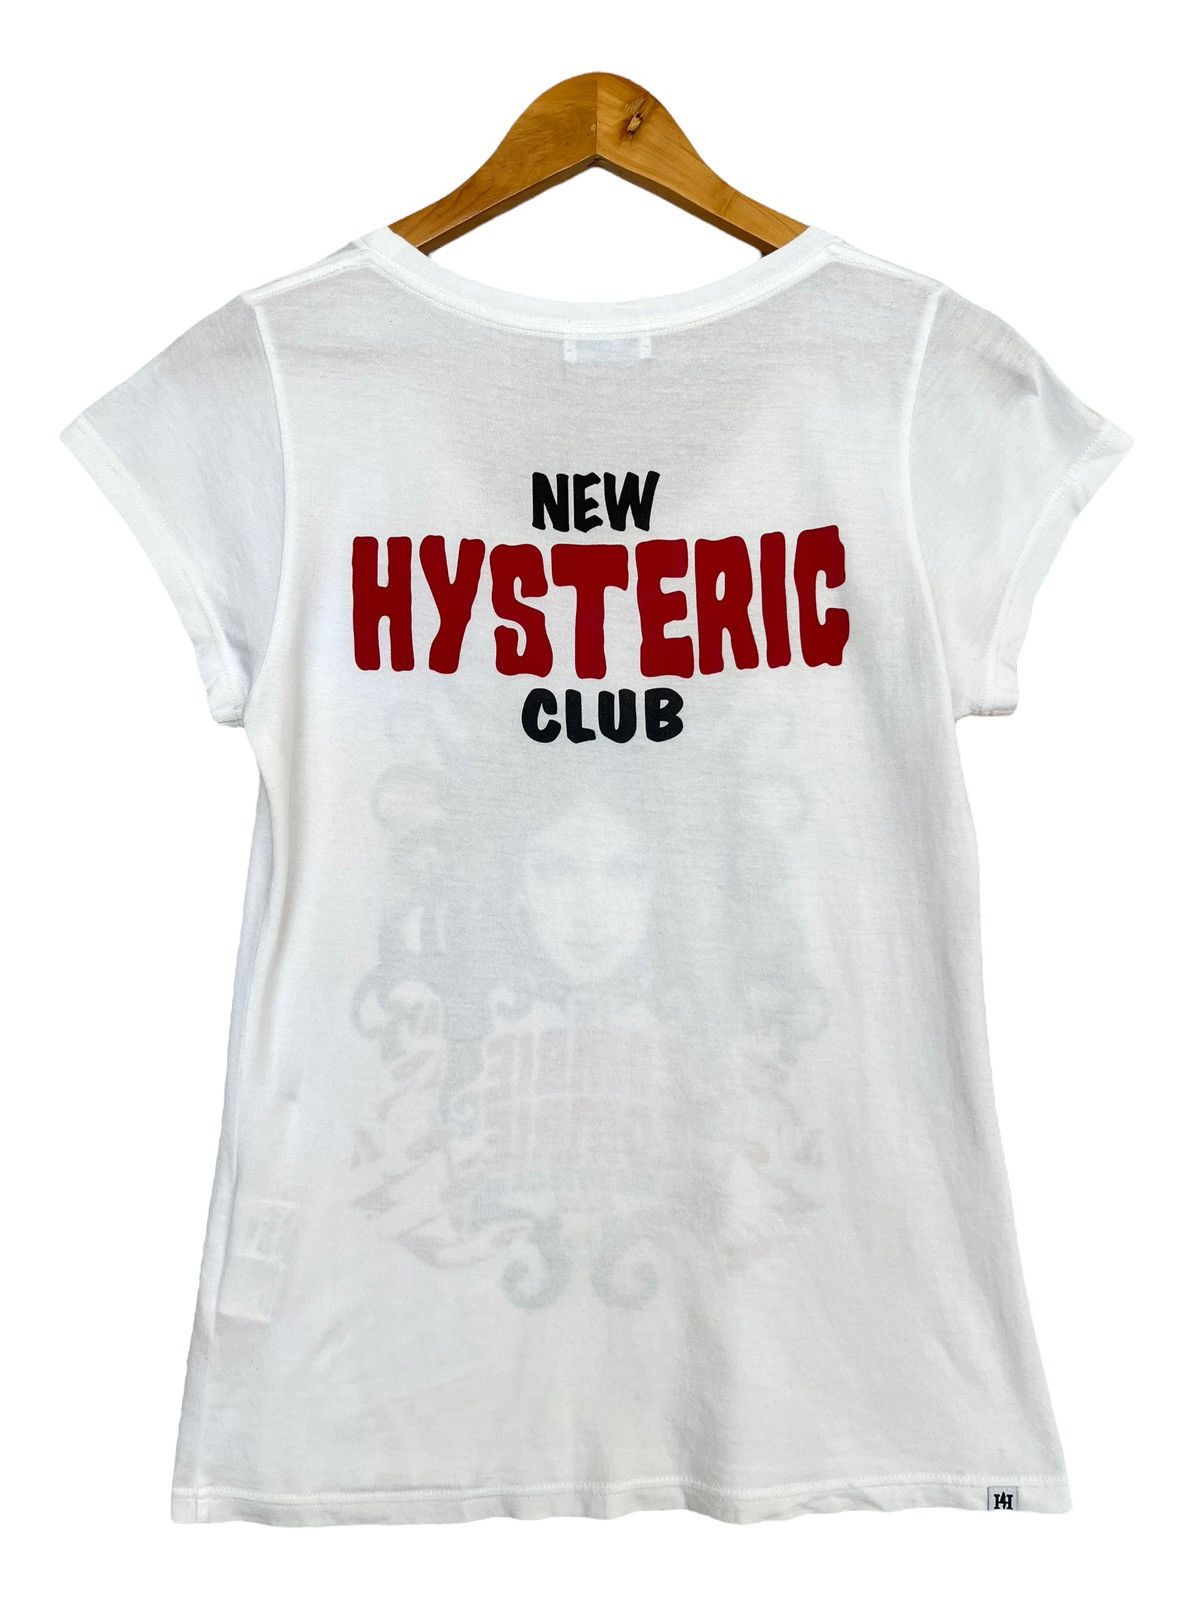 Hysteric Glamour Tee Hysteric Glamour Tshirt - 2